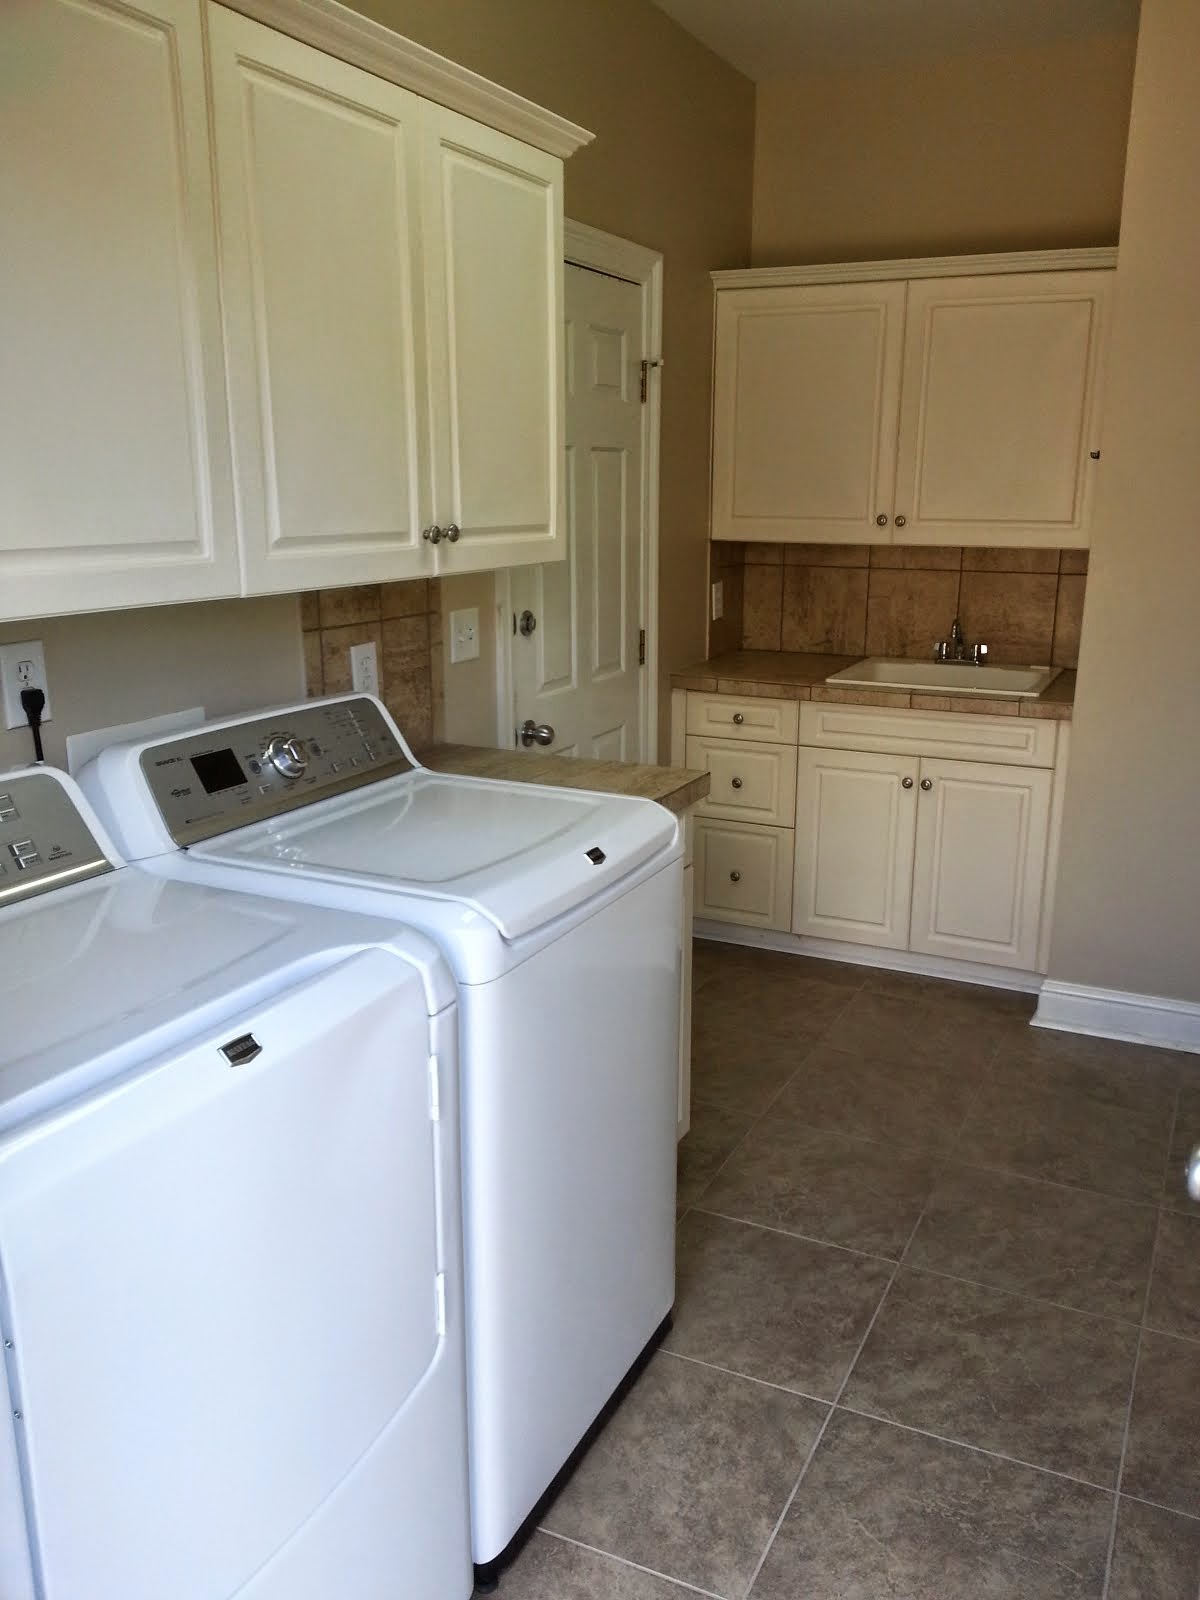 Laundry Room with Maytag XL washer/dryer & utility sink; door to 2-car Garage at left (new tile)